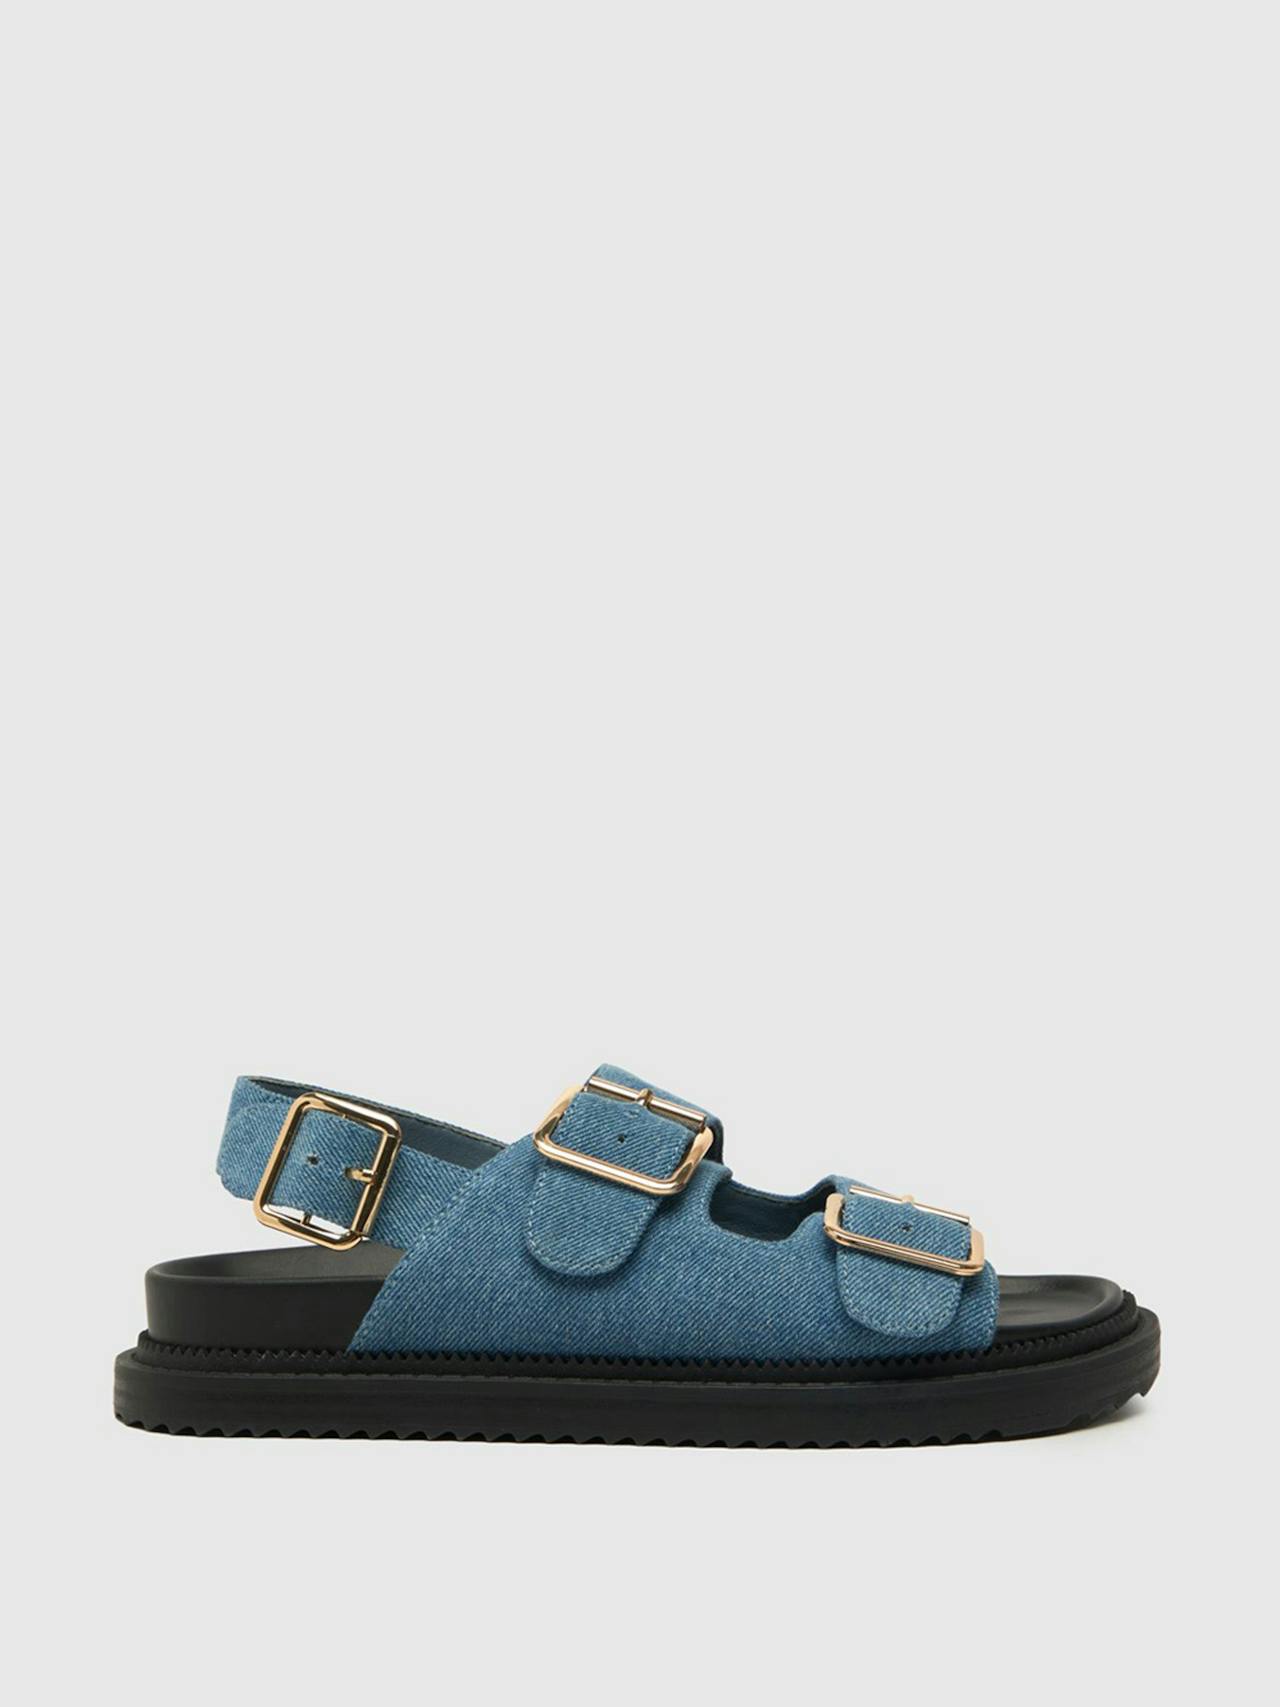 Talbot double buckle sandals in blue